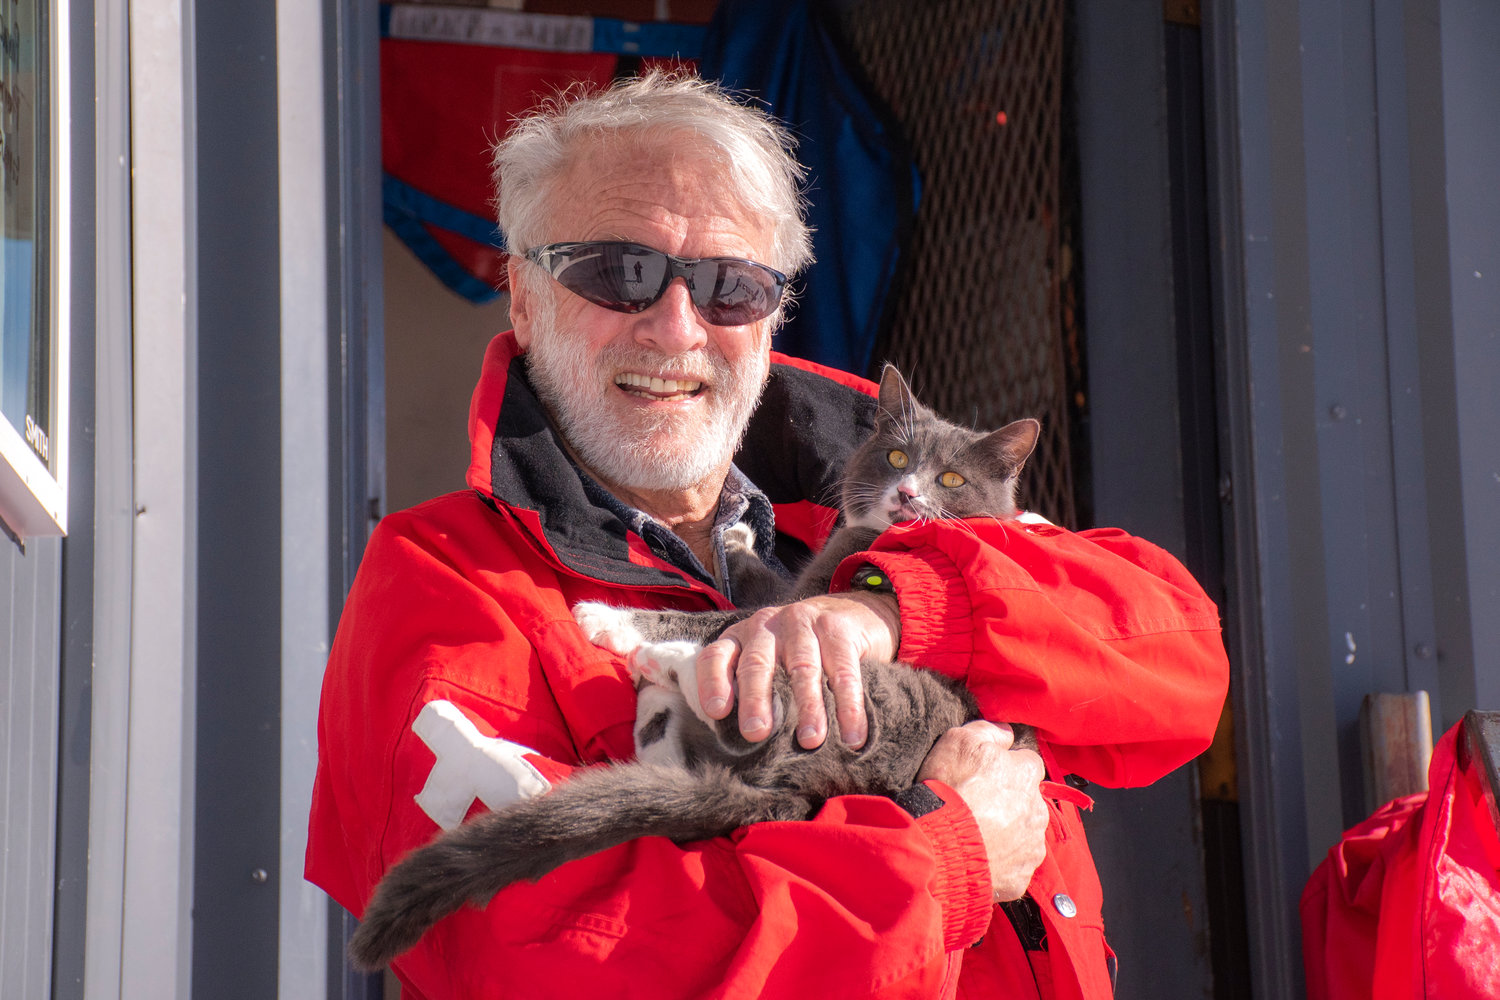 Michael Murphy, known on the slopes as “Murph” and his avalanche cat Uzi pose for a photo outside patrol dispatch at the top of the Great White Express chairlift on Sunday at the White Pass Ski Resort.